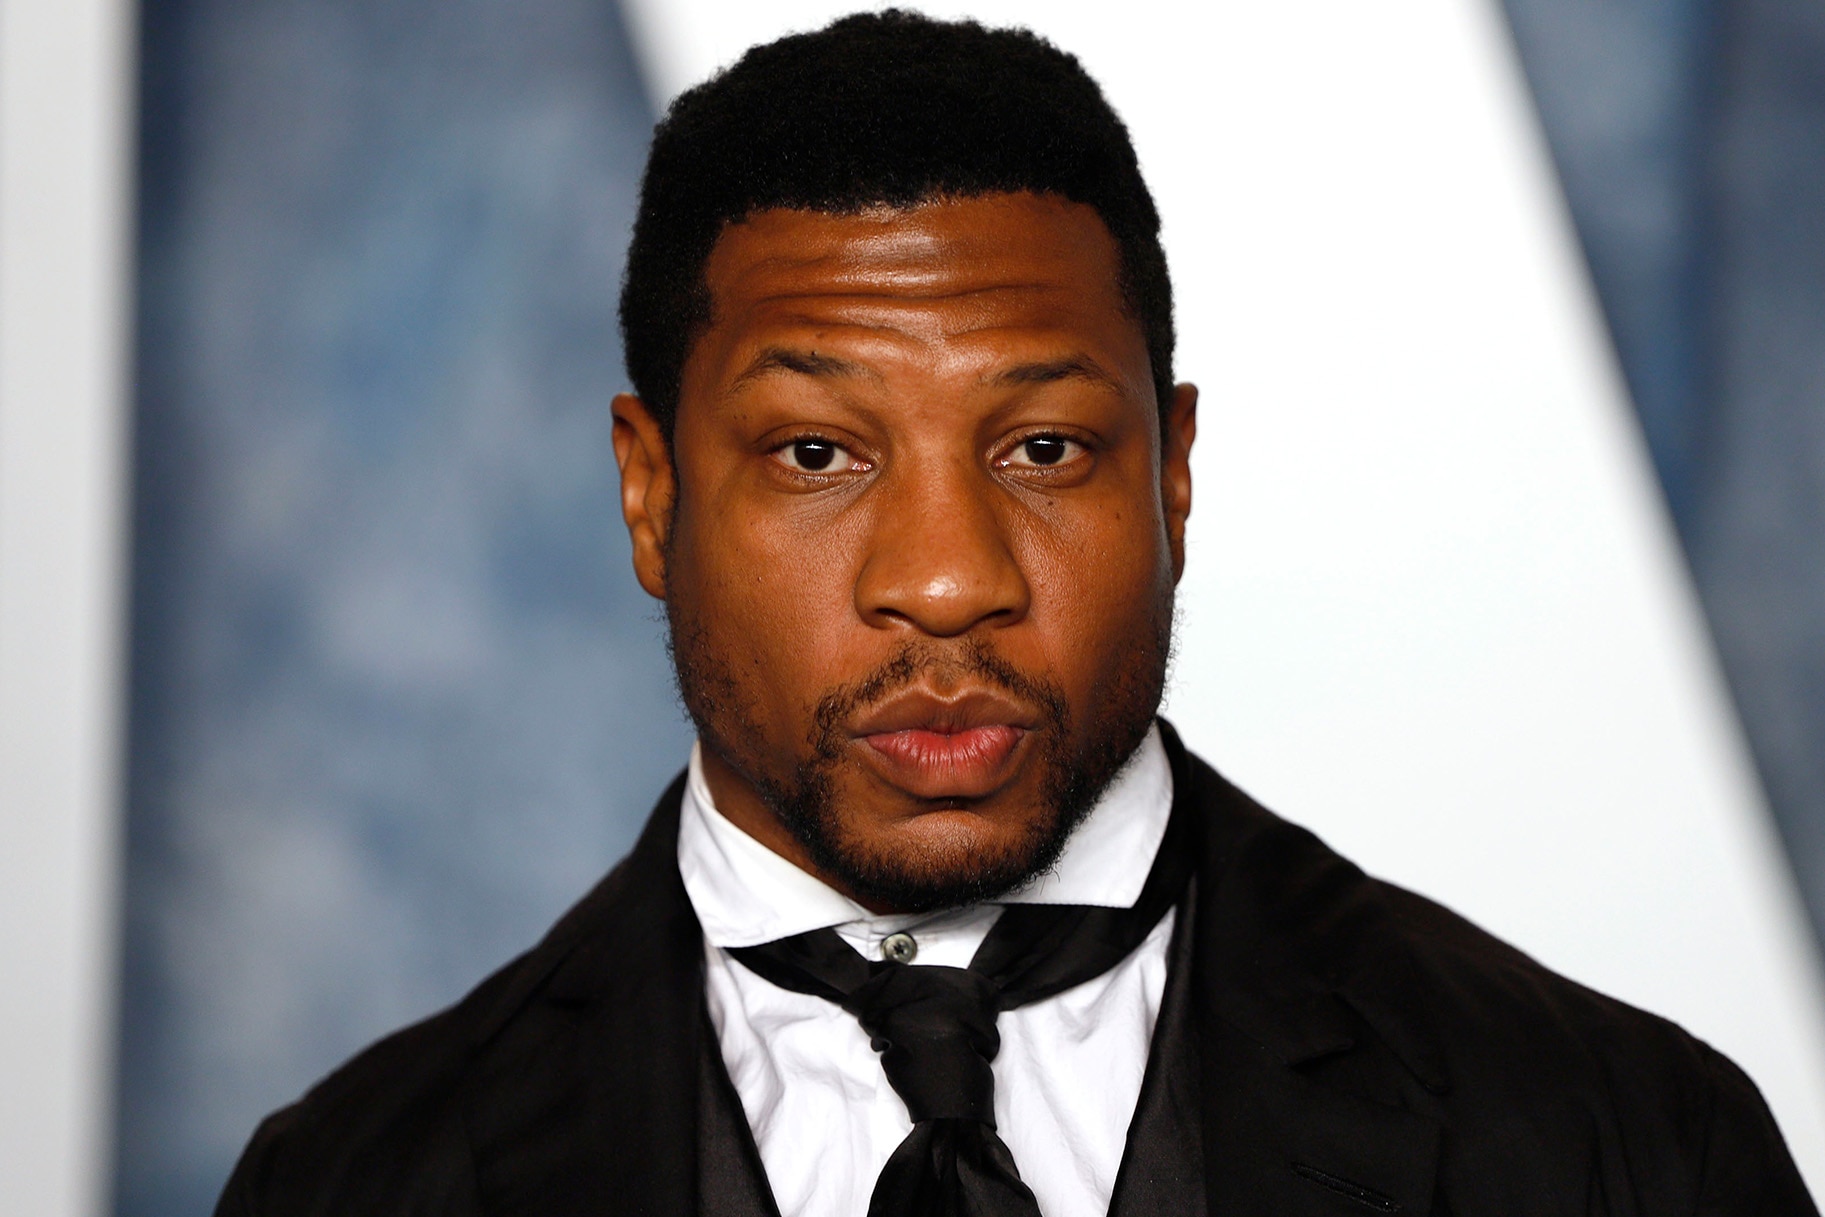 MCU and ‘Lovecraft Country’ star Jonathan Majors arrested for assault, rep denies wrongdoing